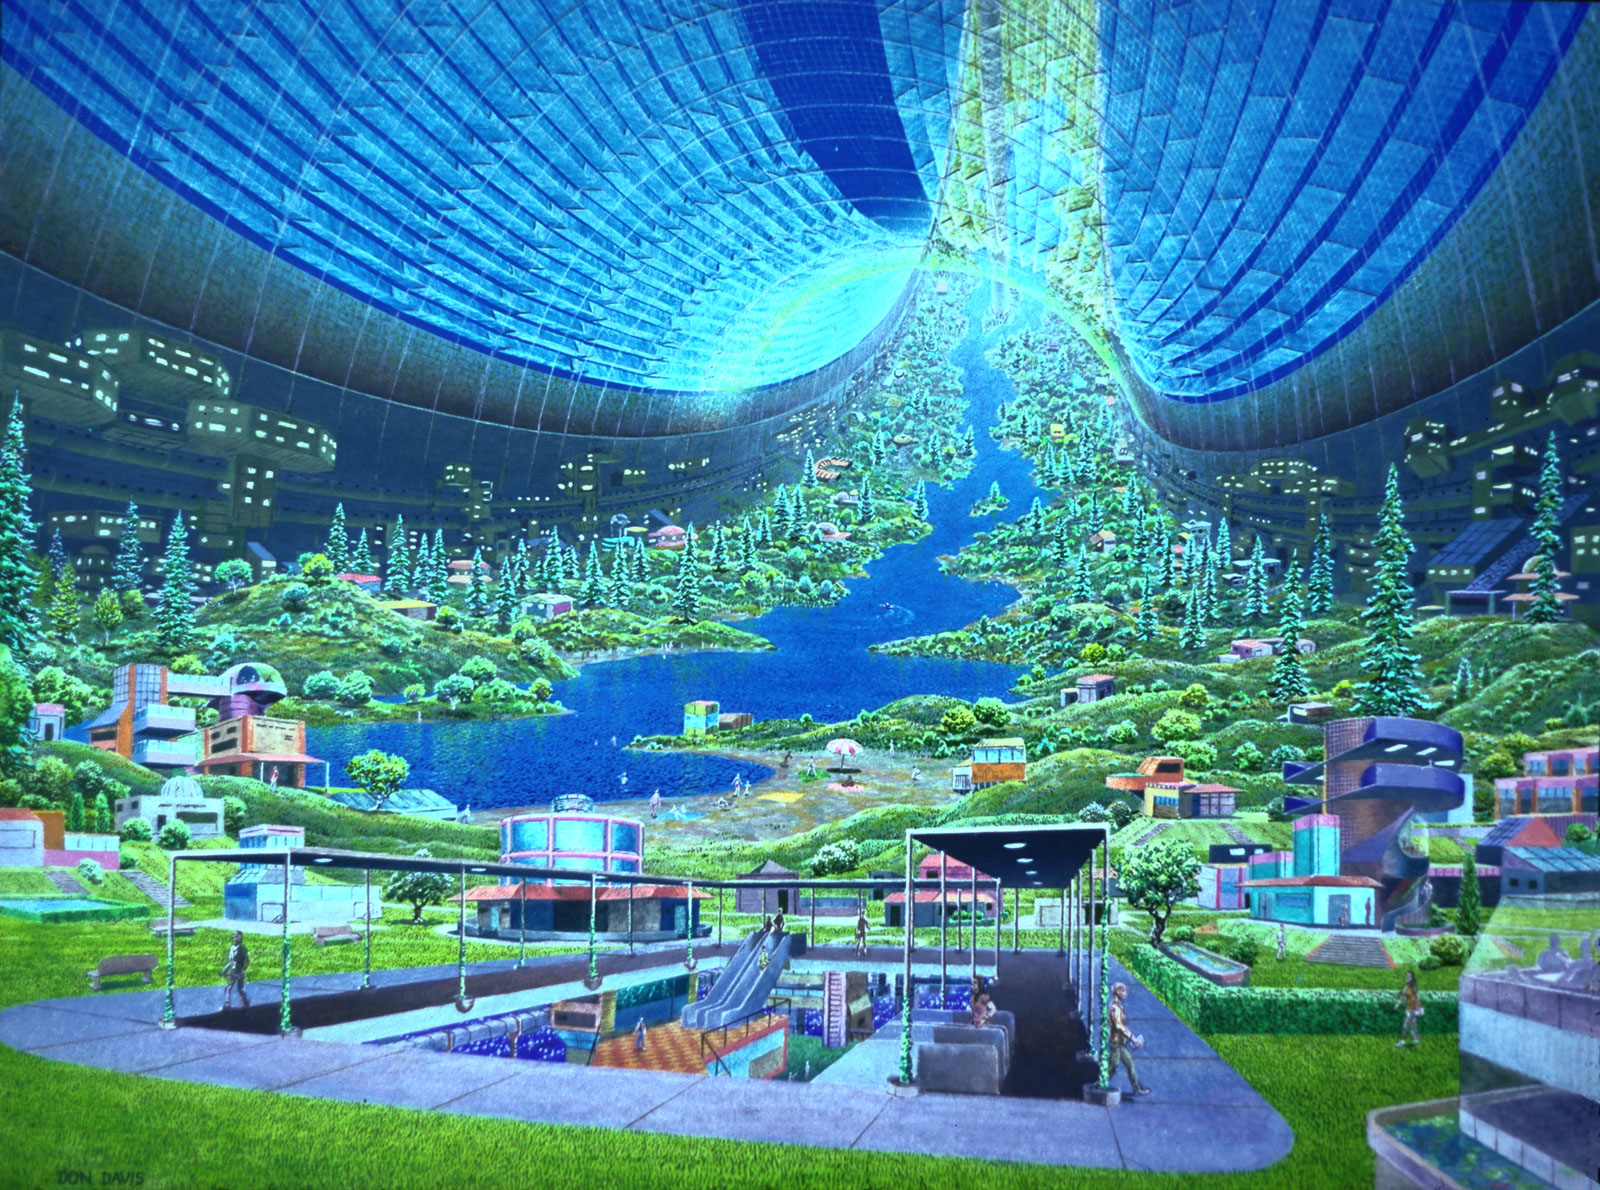 Upcoming Video Series Explores The Retro-Futuristic Space Colonies Of NASA Artists